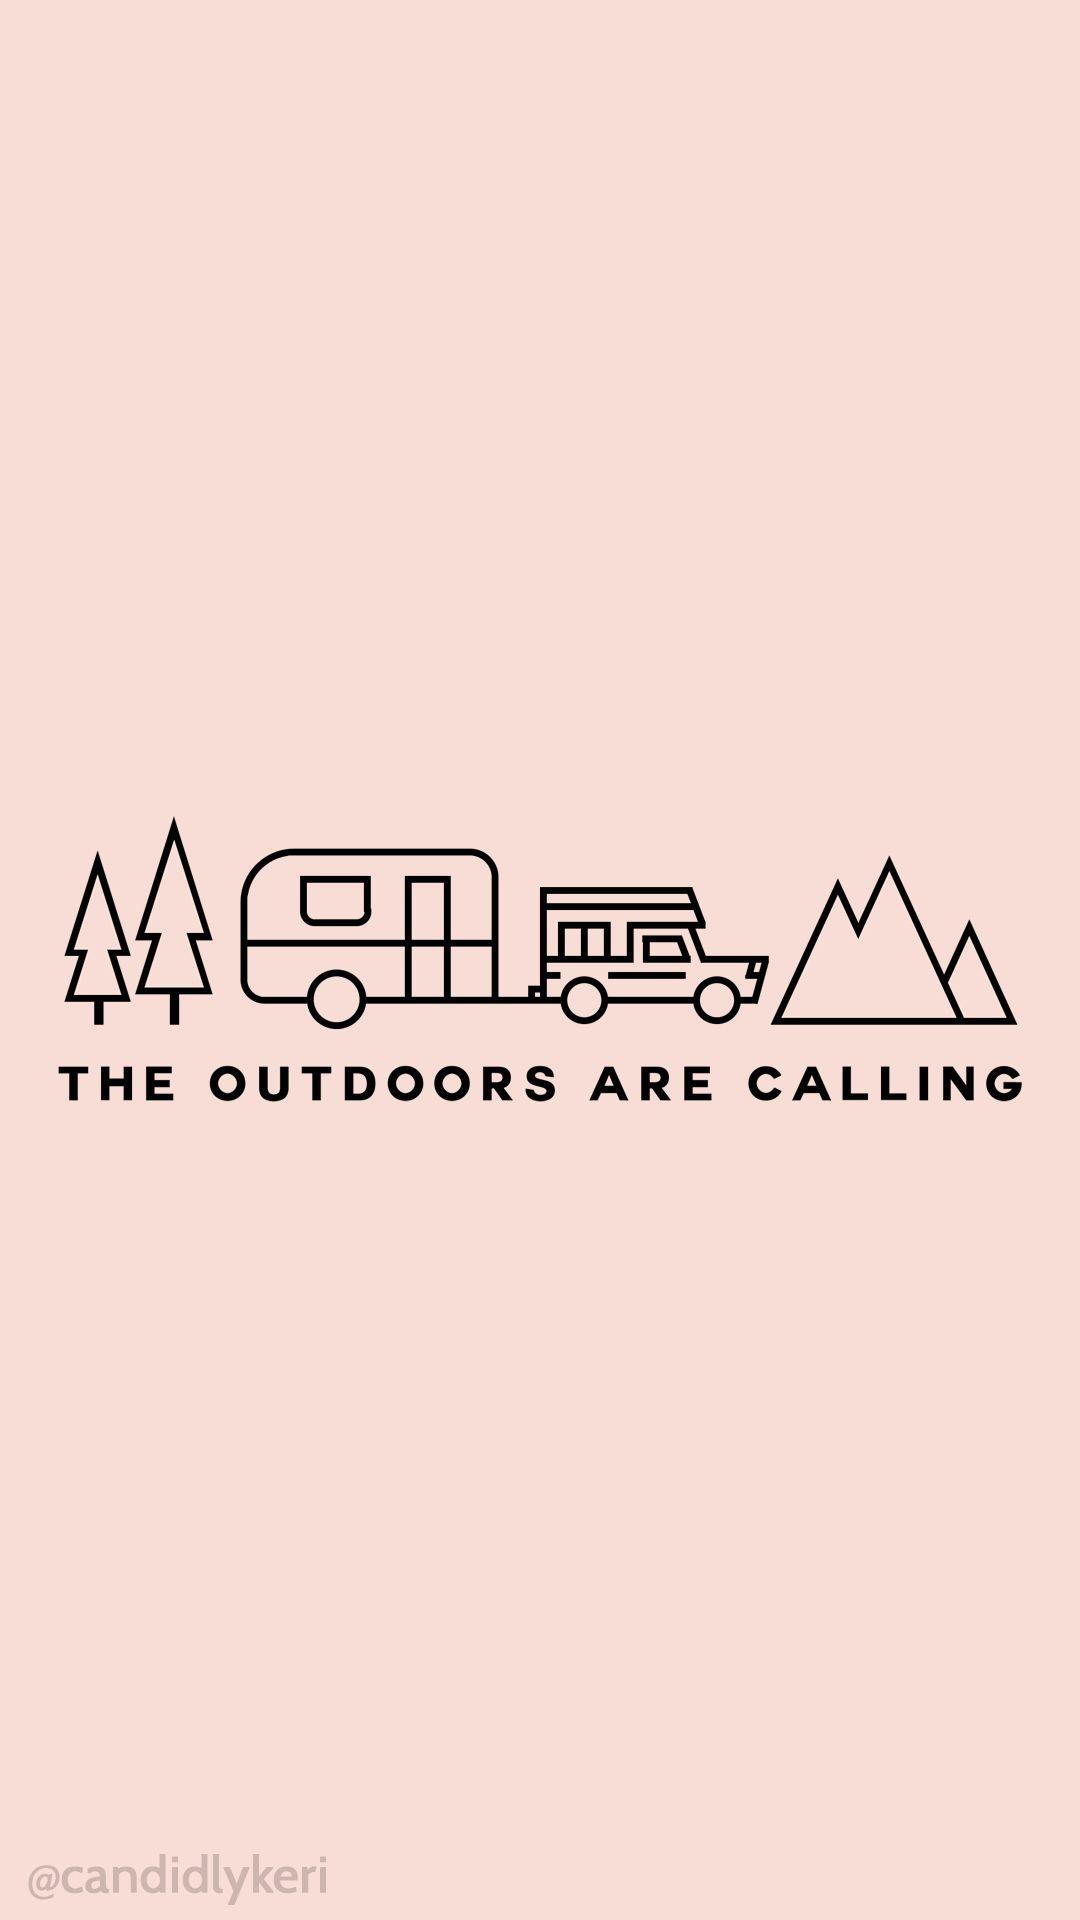 The Outdoors is calling Cute pink quote mountains, trees, camper